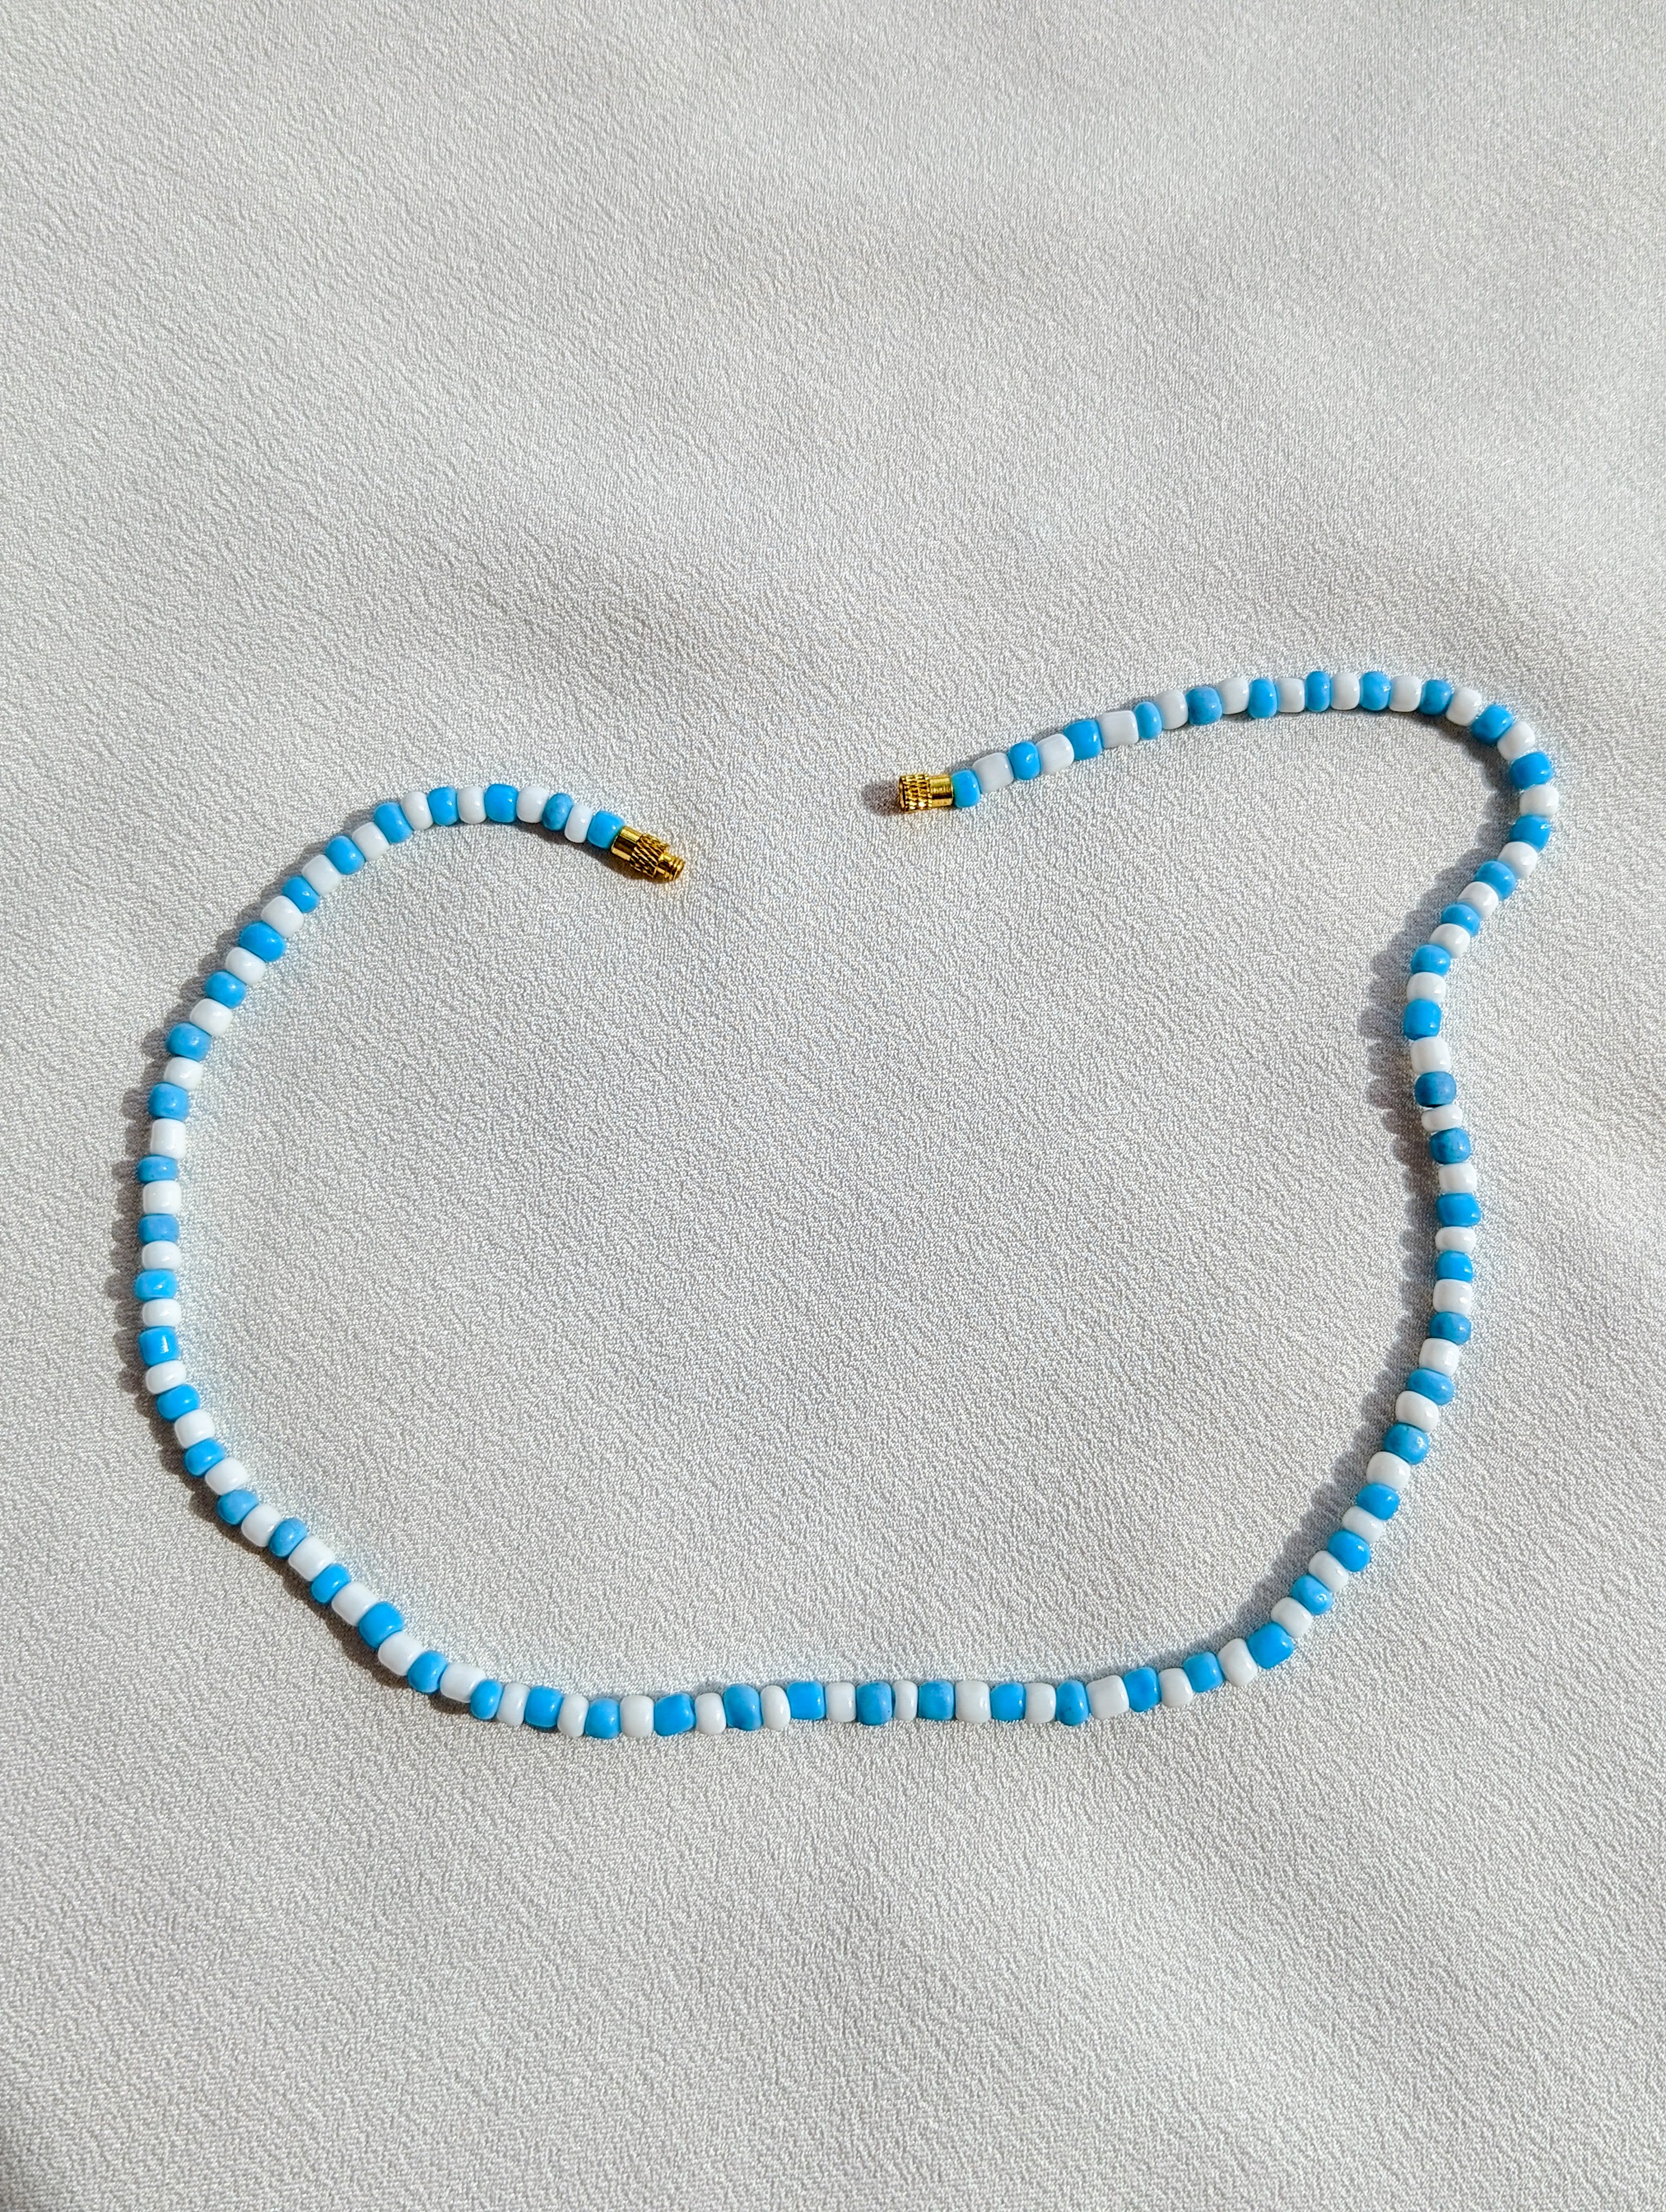 [THE TWO] Necklace: Blue/White [Large Beads]